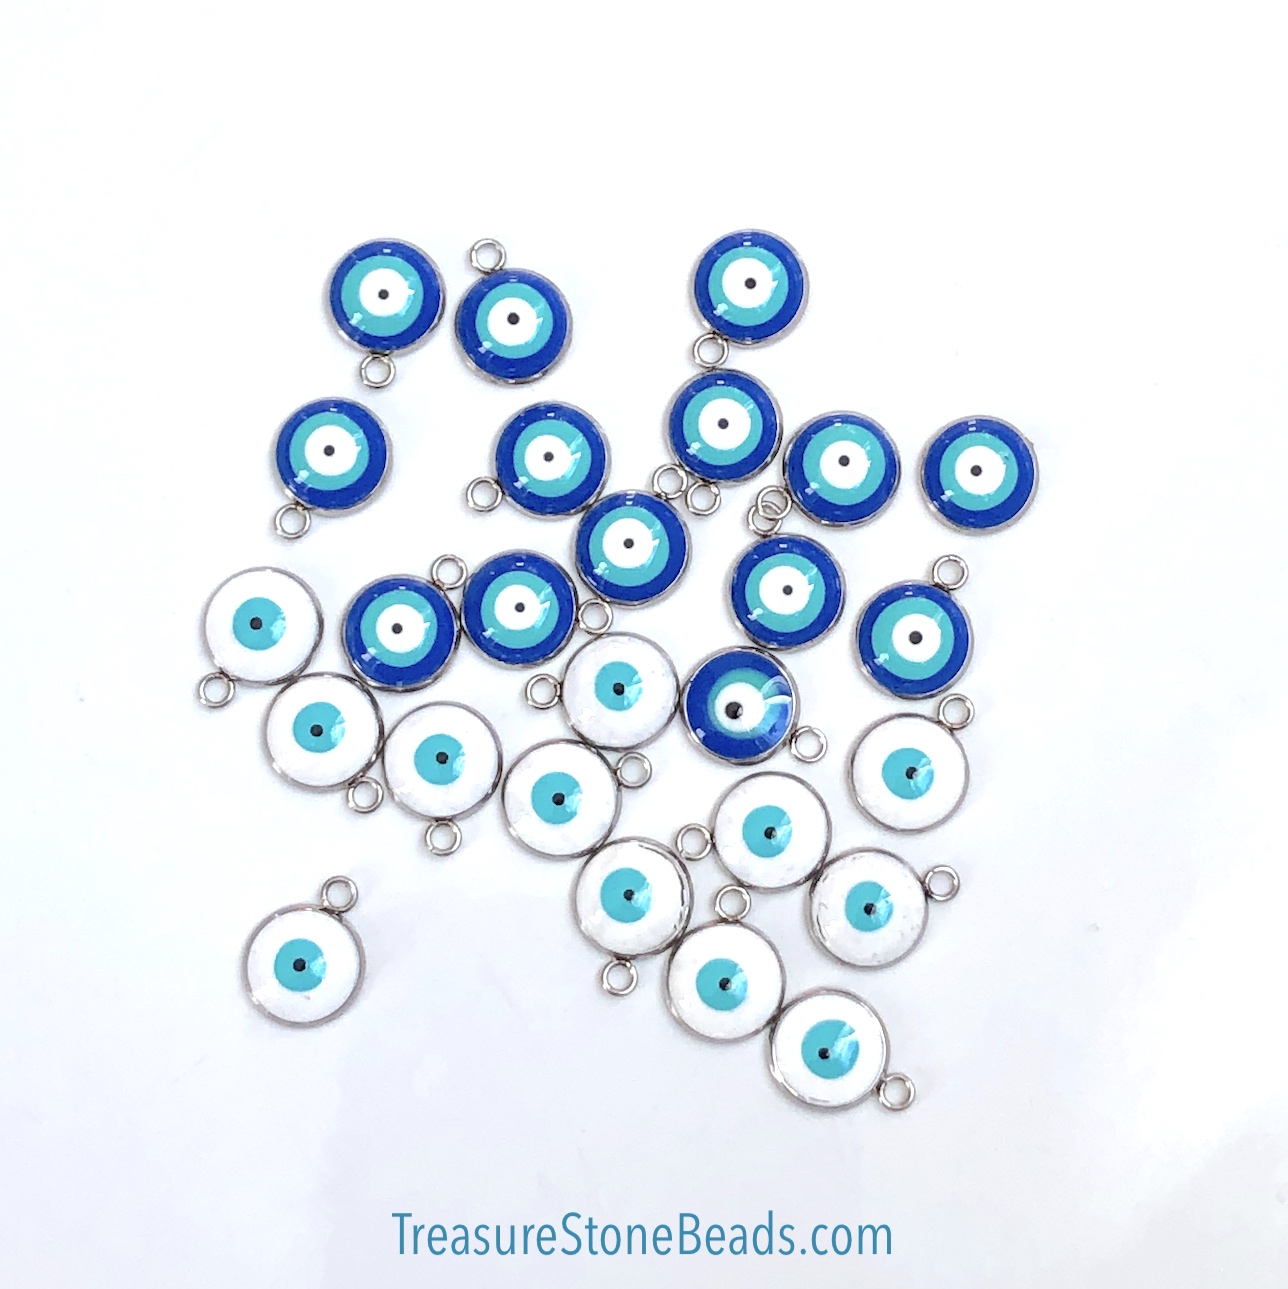 Charm, pendant, stainless steel, 10mm evil eye, blue. Pack of 3 - Click Image to Close